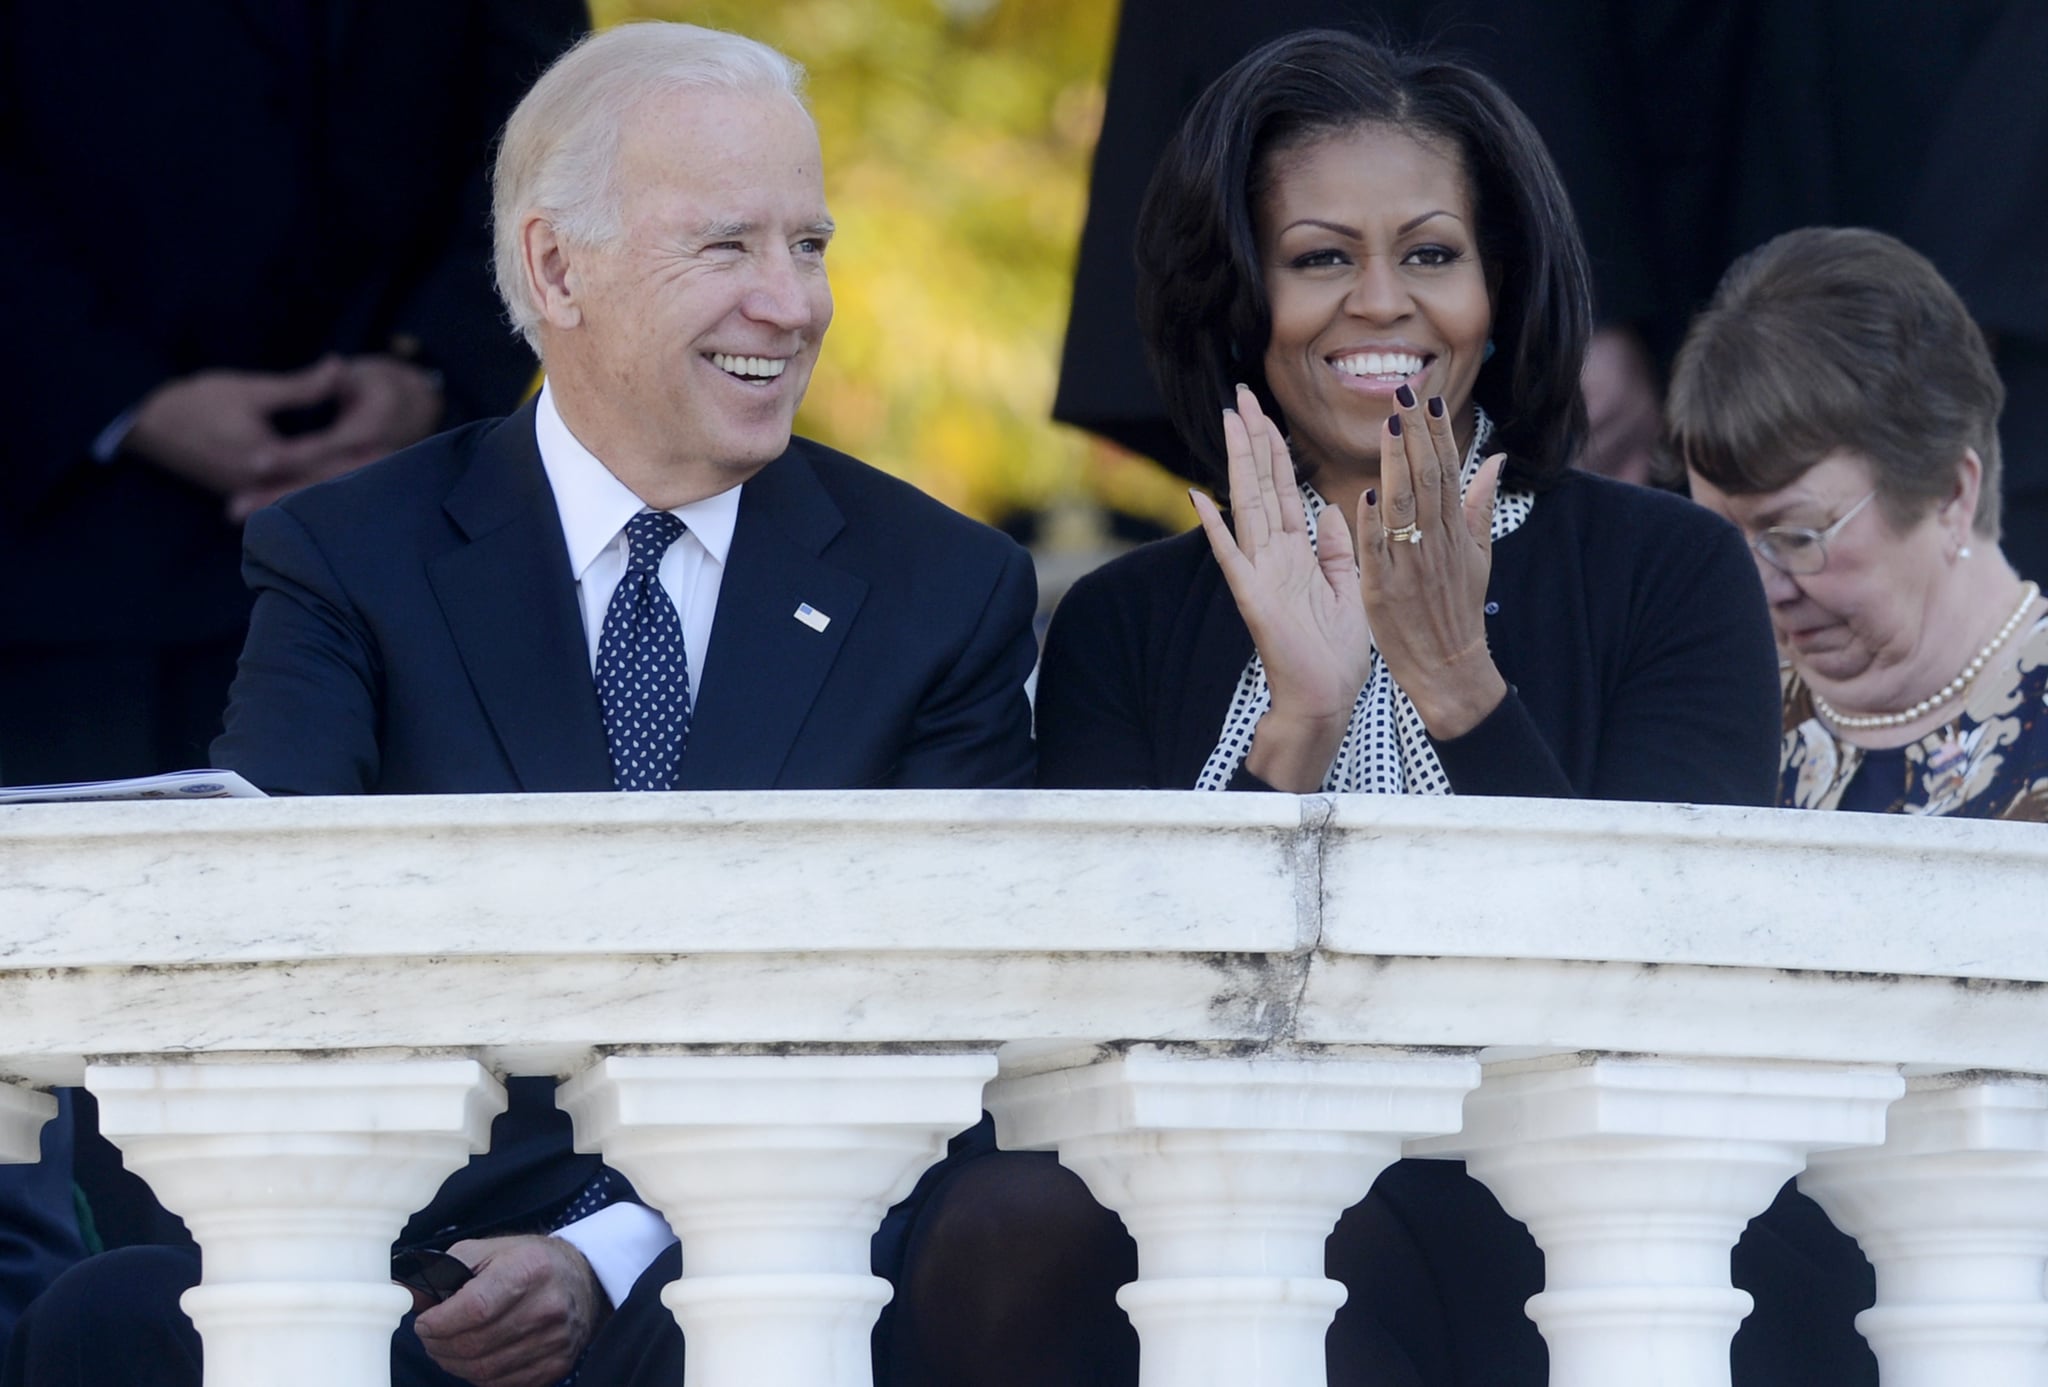 ARLINGTON, VA - NOVEMBER 11: US Vice President Joe Biden (L) and First Lady Michelle Obama (R) attend a ceremony on Veteran's Day at the Tomb of the Unknown Soldier in Arlington National Cemetery on November 11, 2012 in Arlington, Virginia. (Photo by Michael Reynolds-Pool/Getty Images)